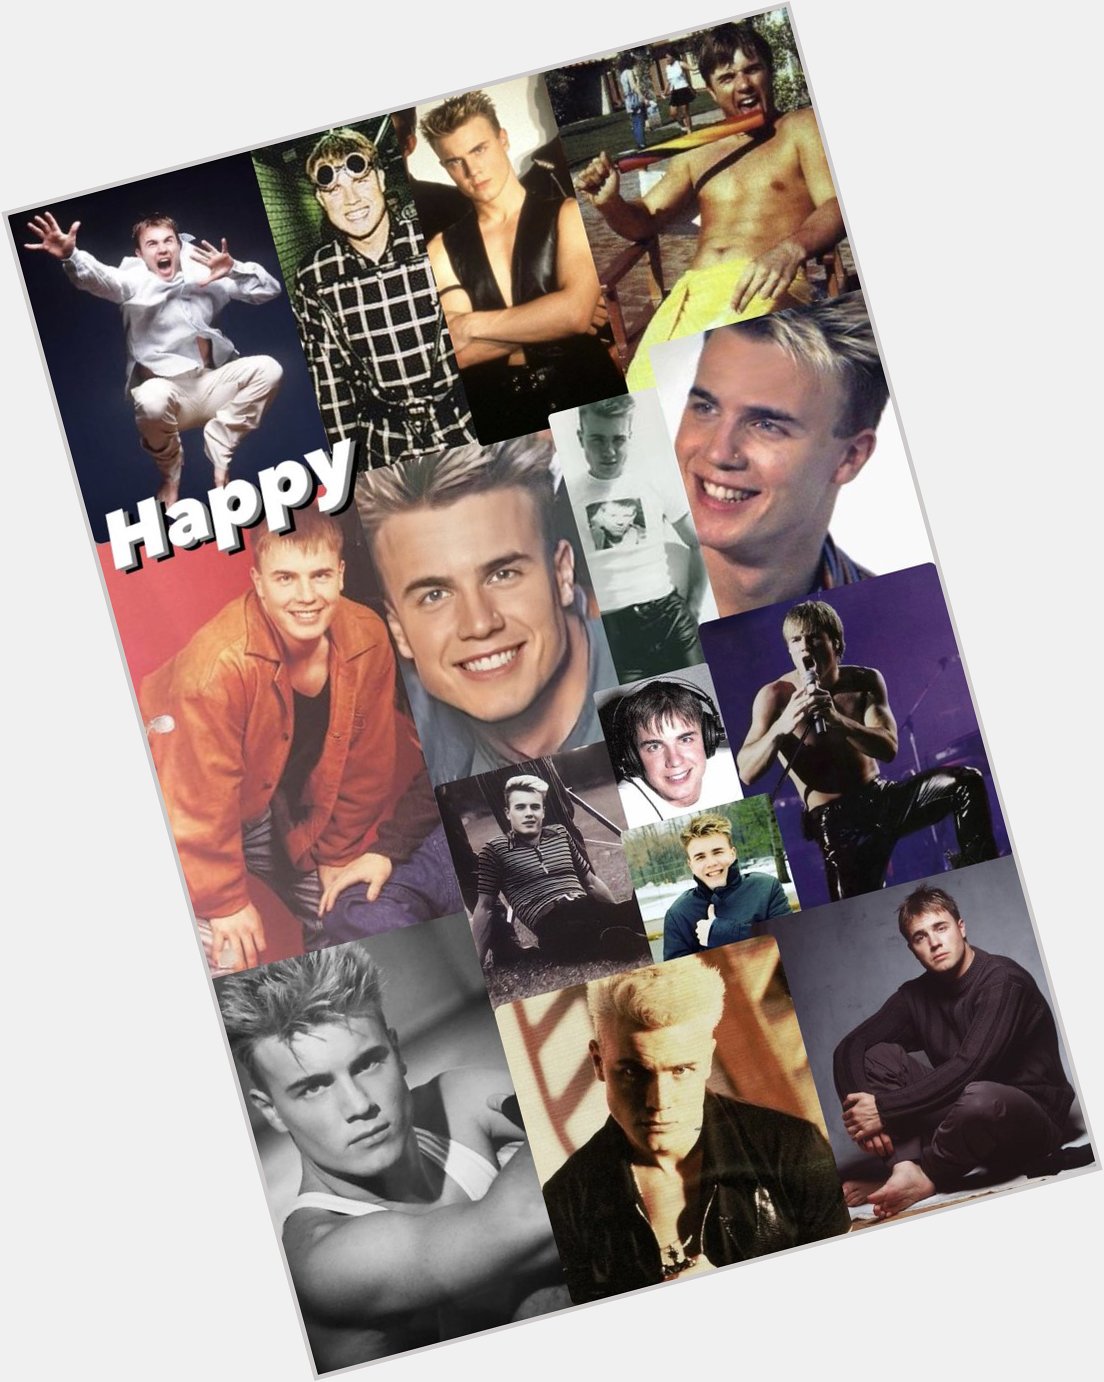 Happy Birthday Gary Barlow! Thanks for creating the soundtrack to our lives. Love you     